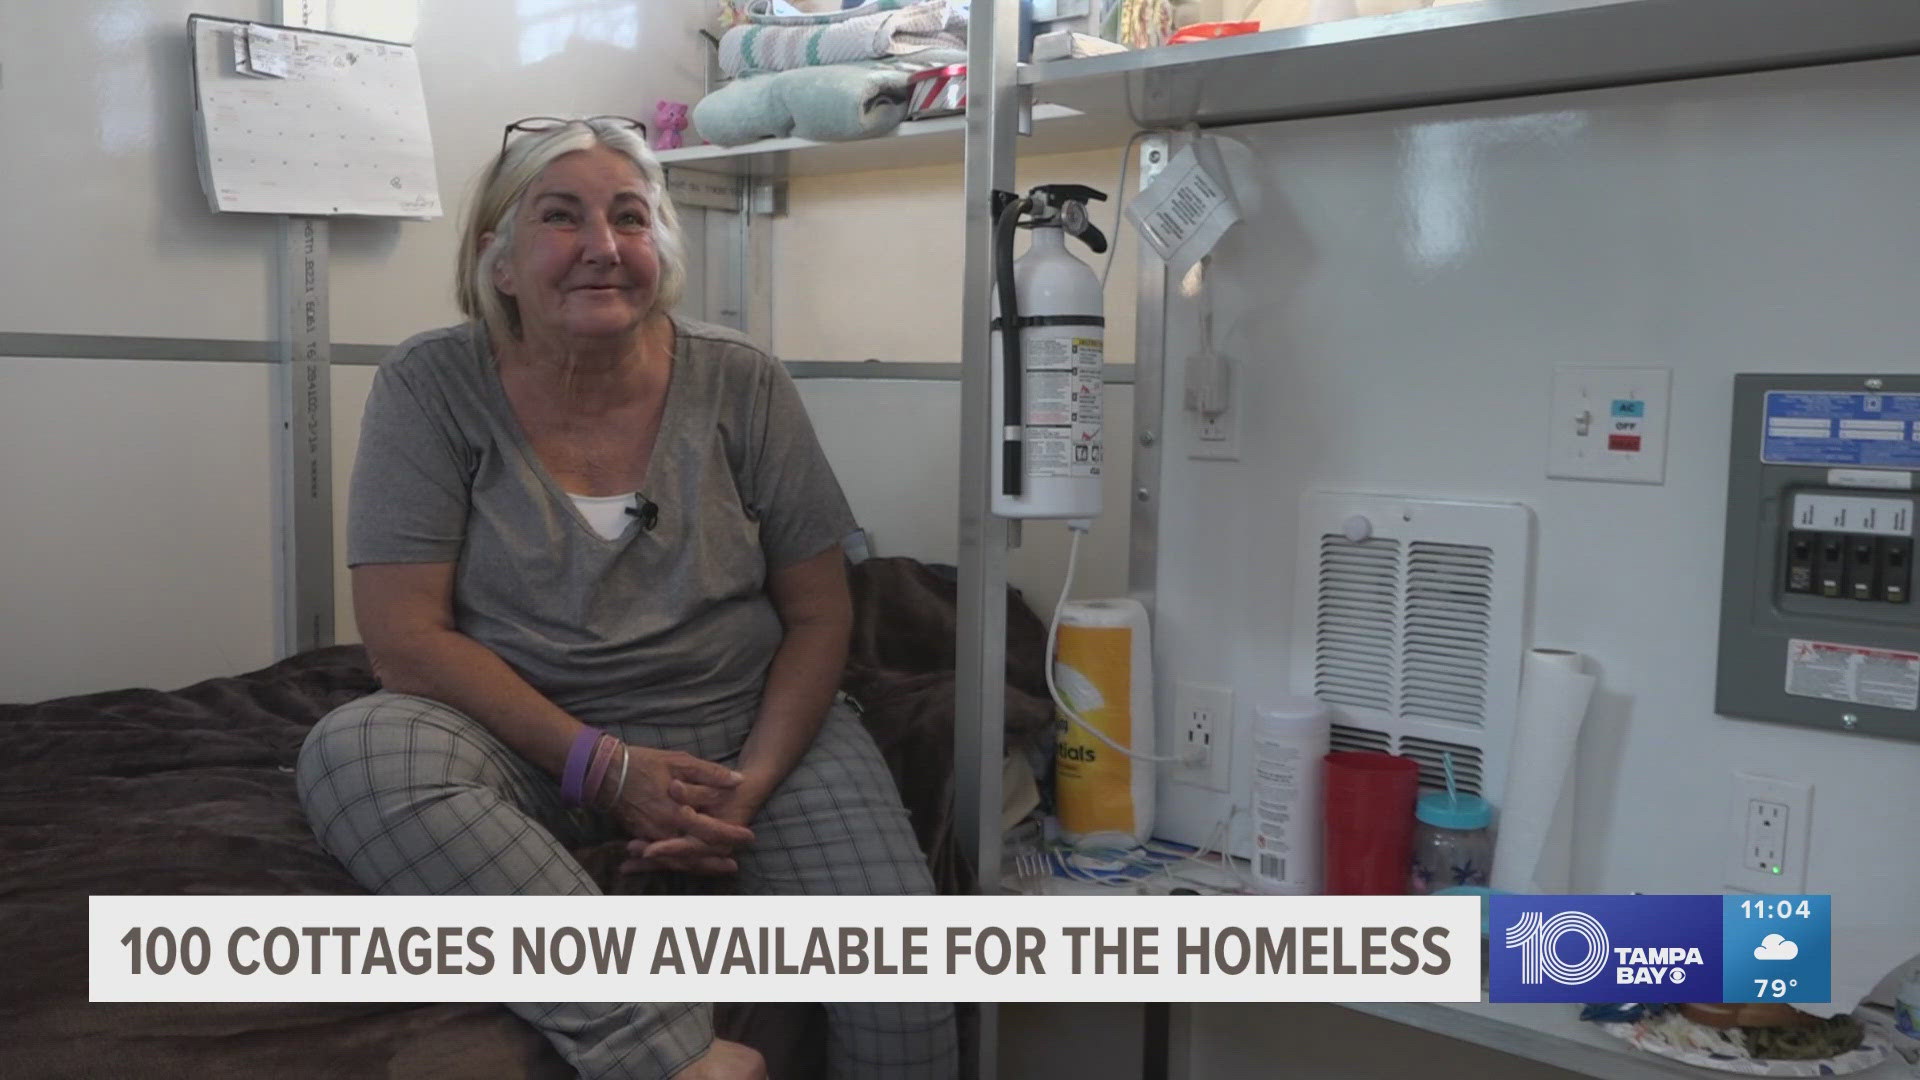 Catholic Charities provides 64-square-foot air-conditioned cottages for those in need.